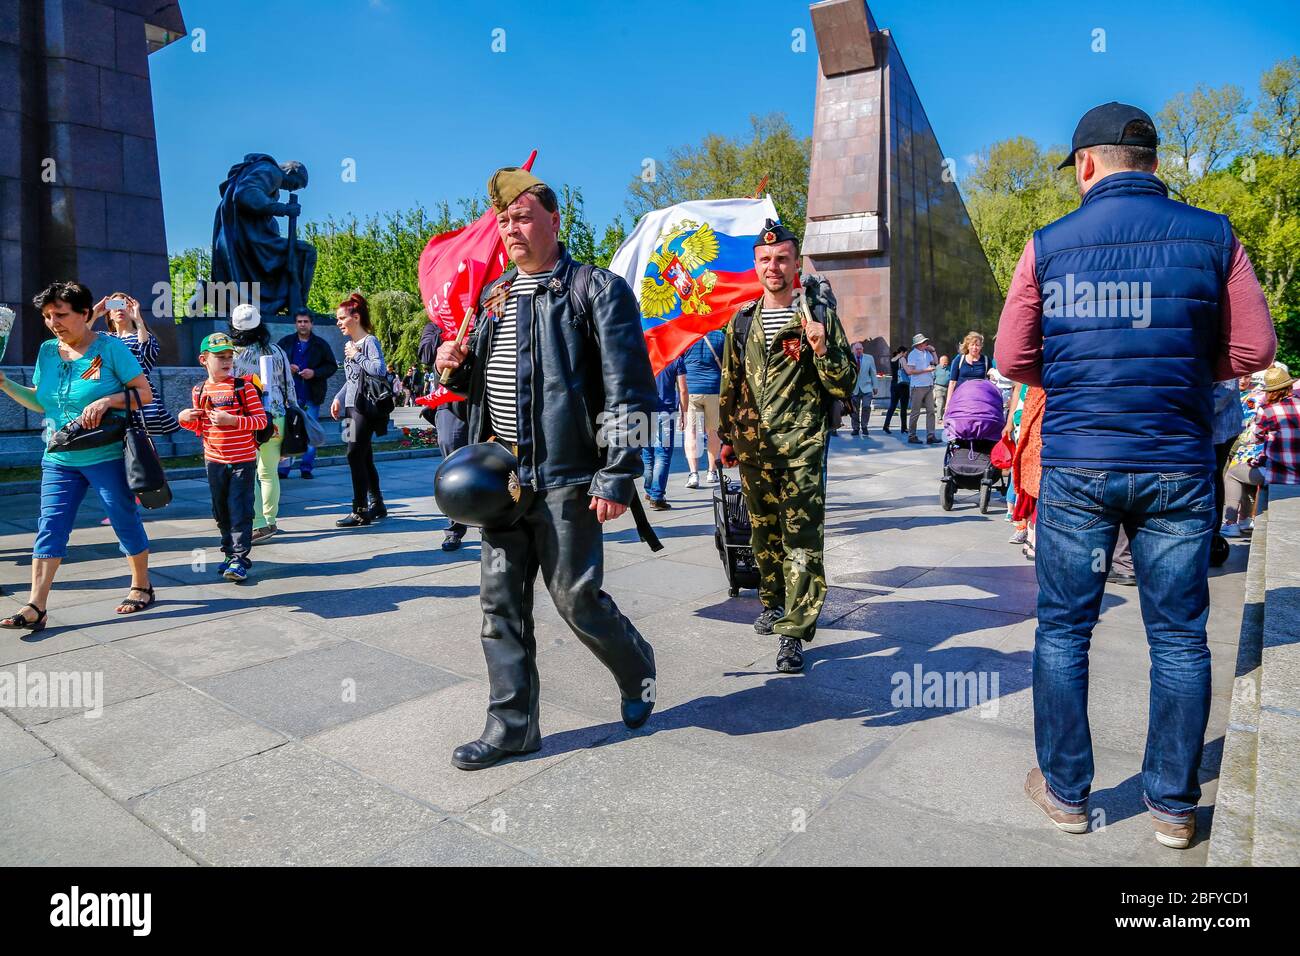 May 9, 2016, Berlin, at the Soviet War Memorial in Treptower Park (Treptower War Memorial), a memorial and at the same time a military cemetery, numerous Russians and German-Russians with many colorful flags commemorate the 71st day of victory at the end of the Second World War. The memorial was erected in Germany in 1949 on the instructions of the Soviet military administration to honor the soldiers of the Red Army who died in World War II. Over 7000 of the soldiers who died in the Schlaughs around Berlin are buried here. Men, some in uniform, with the Russian and Soviet national flags. | usa Stock Photo